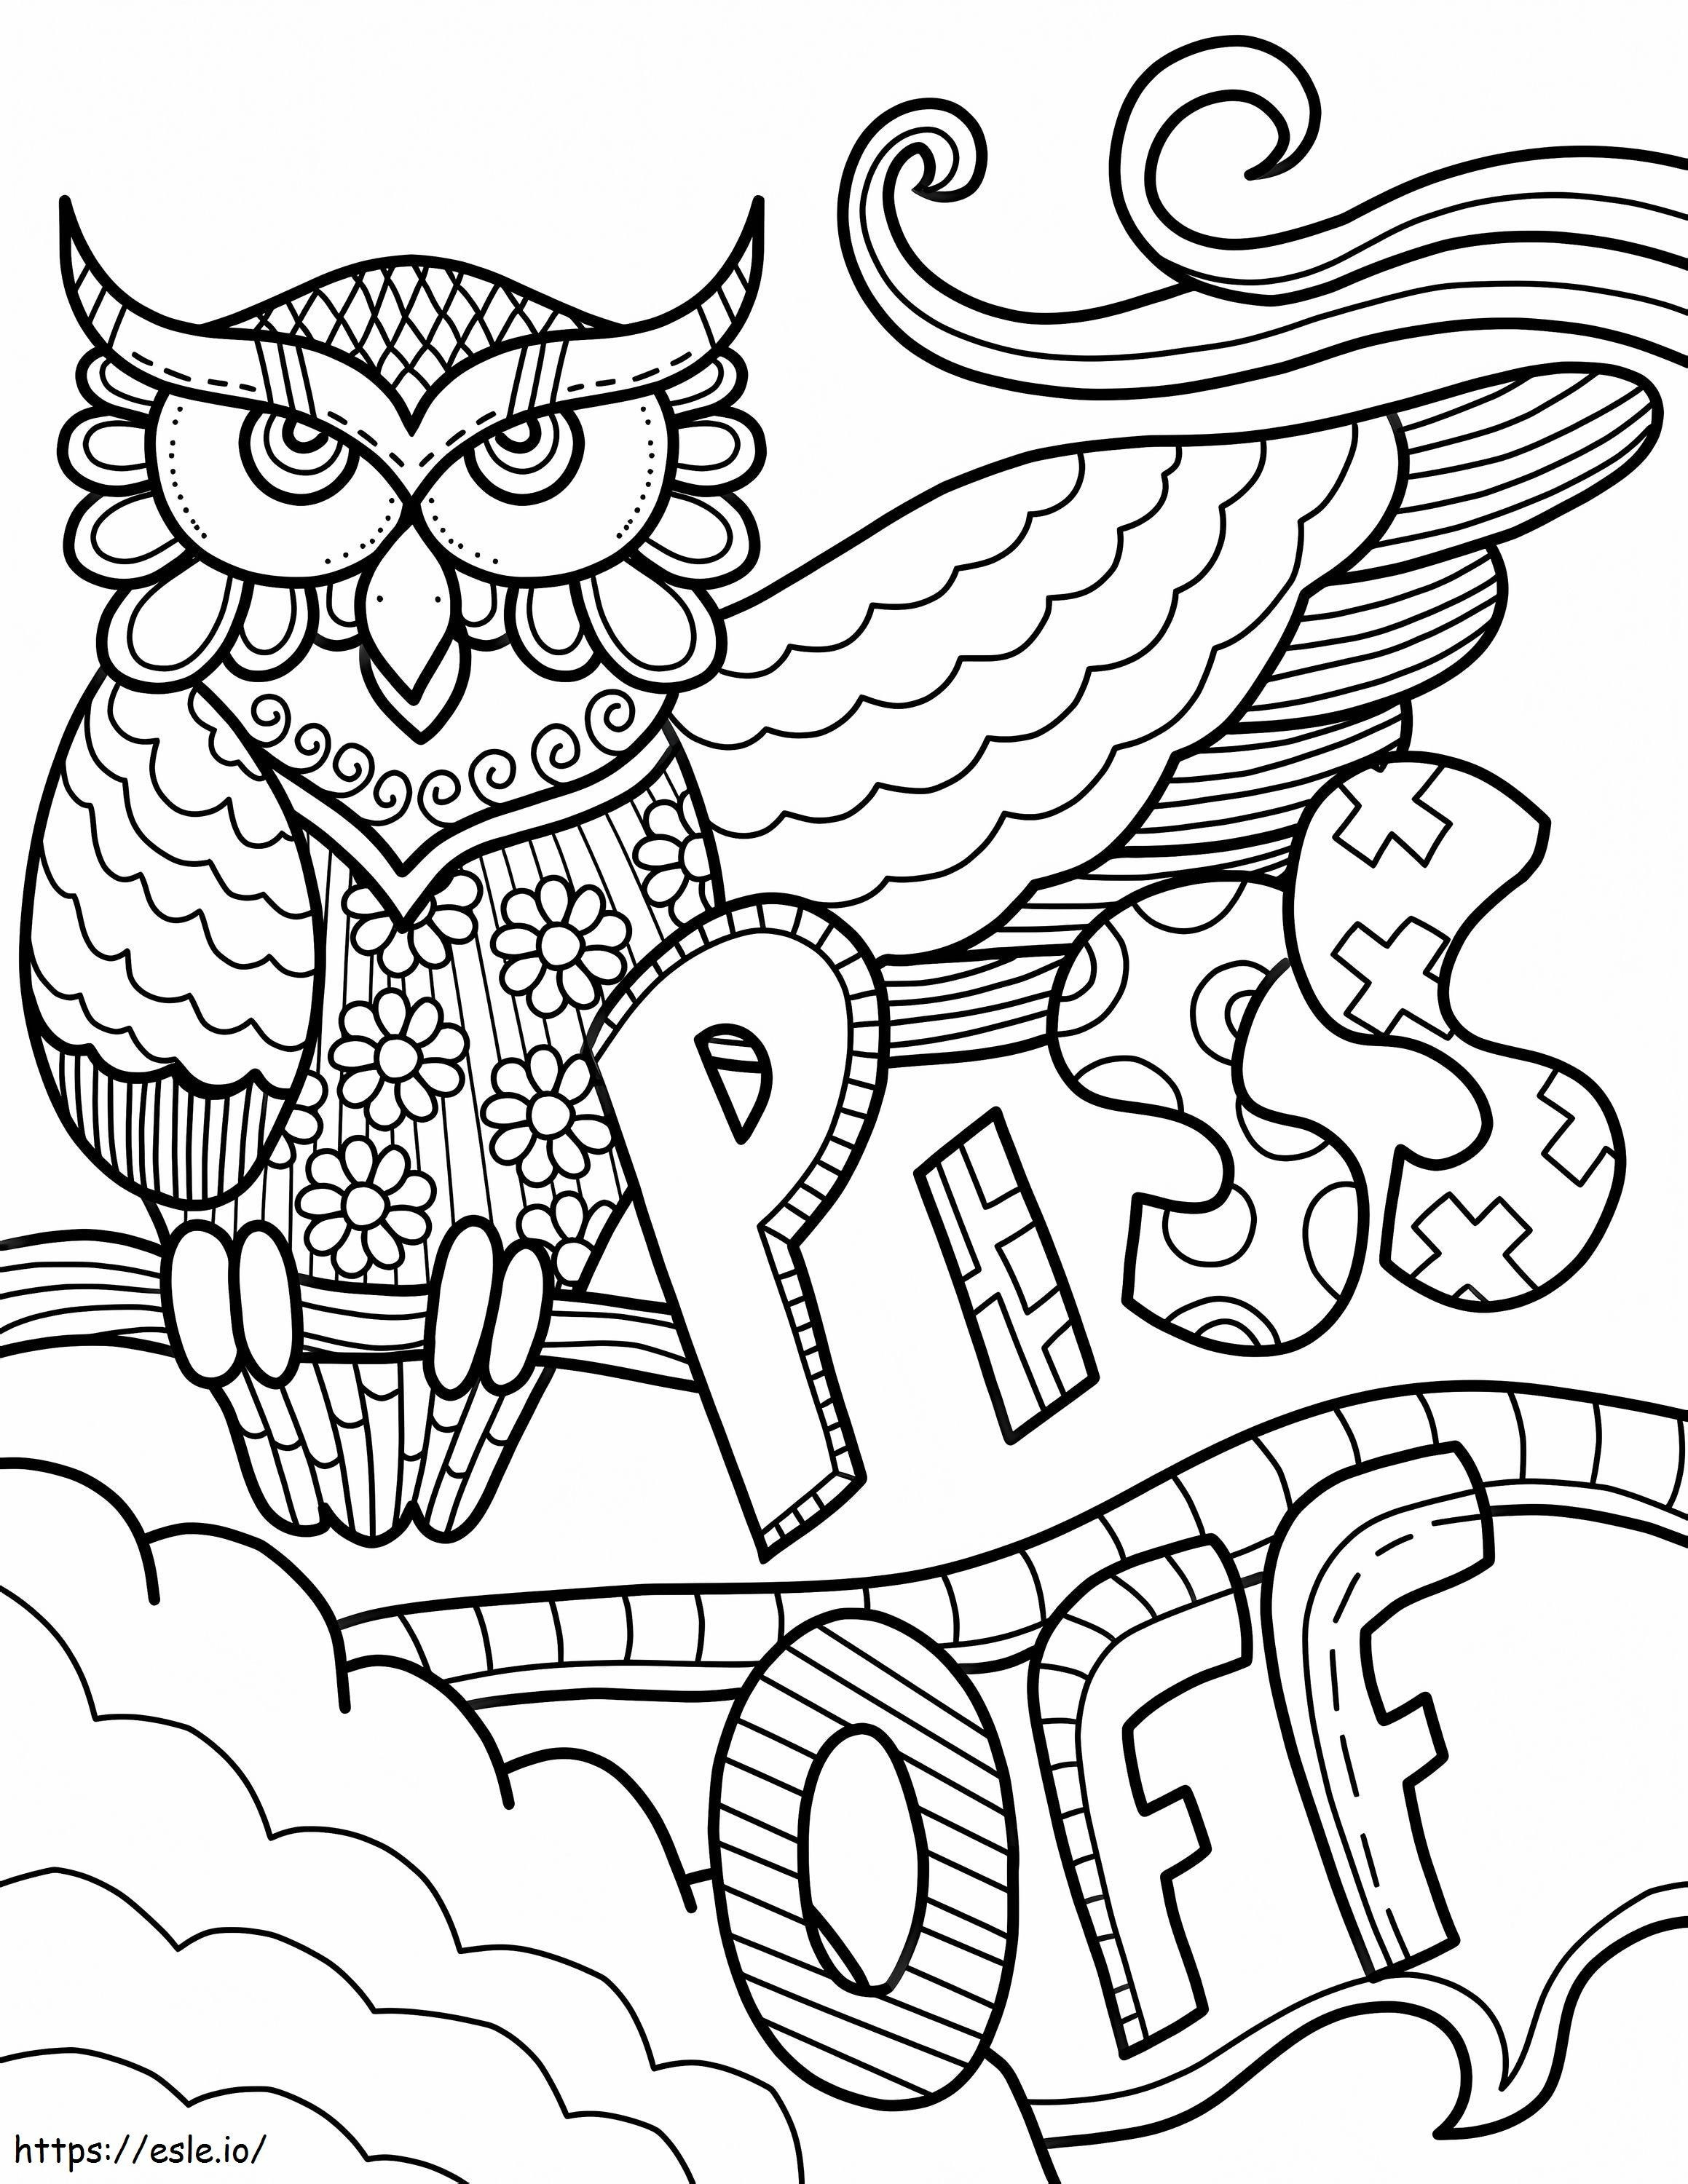 1576464582 Untitled coloring page